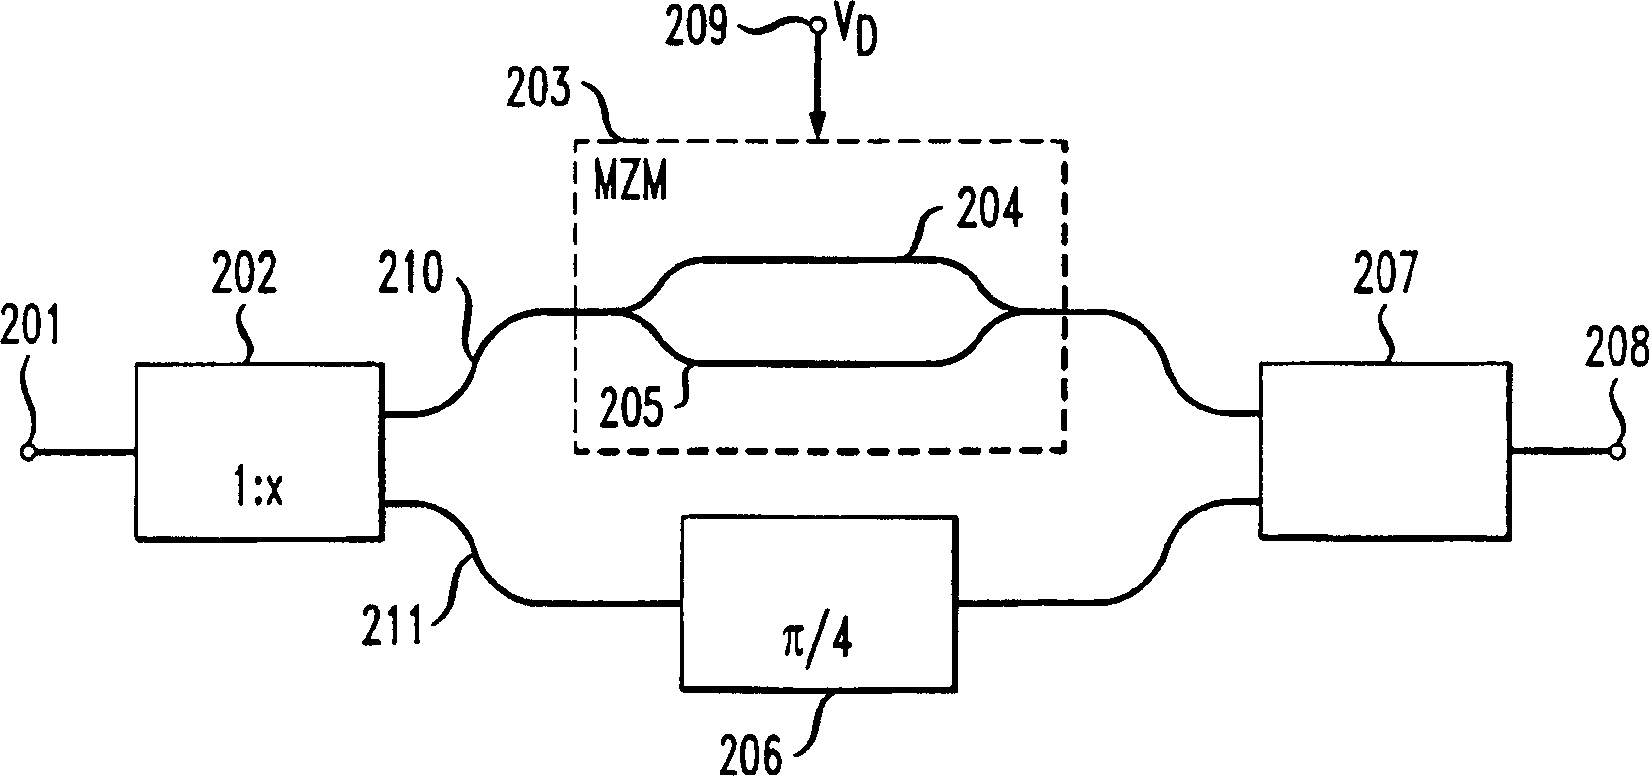 Direct optical n-state phase shift keying